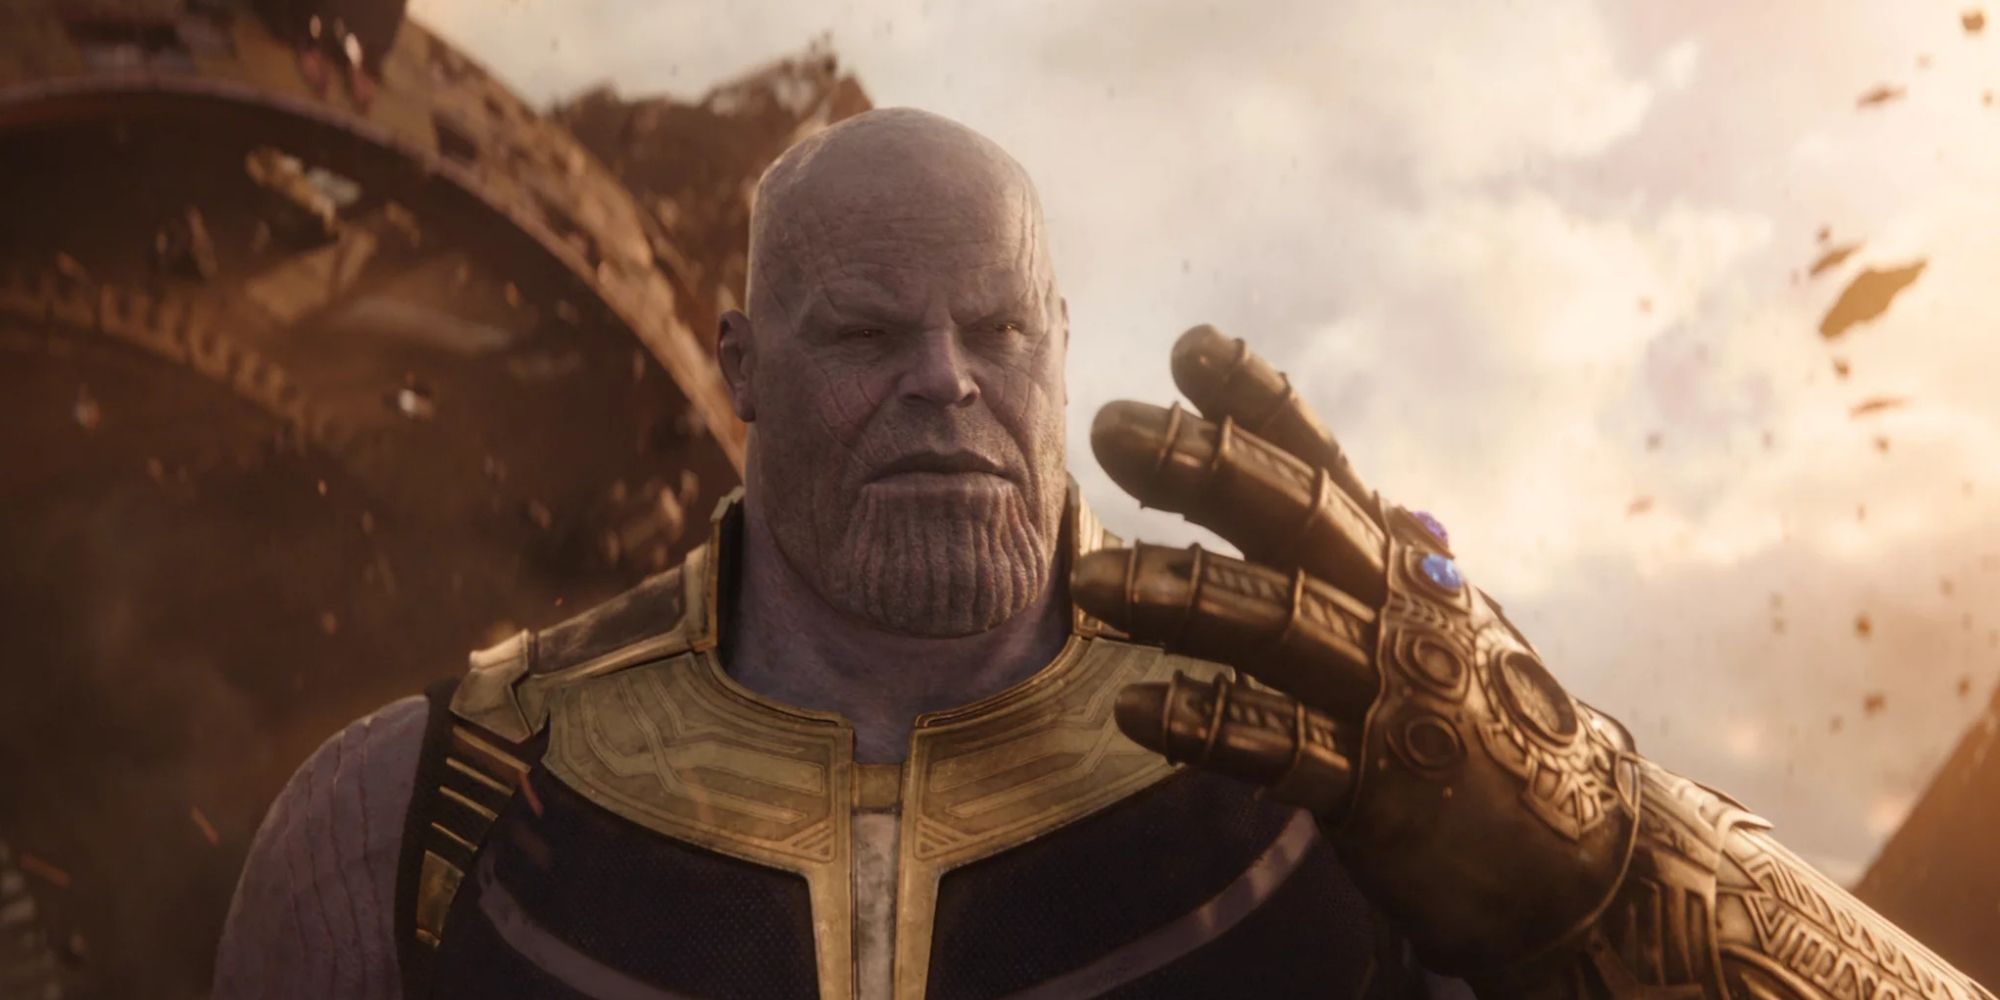 Thanos assembles the infinity stones